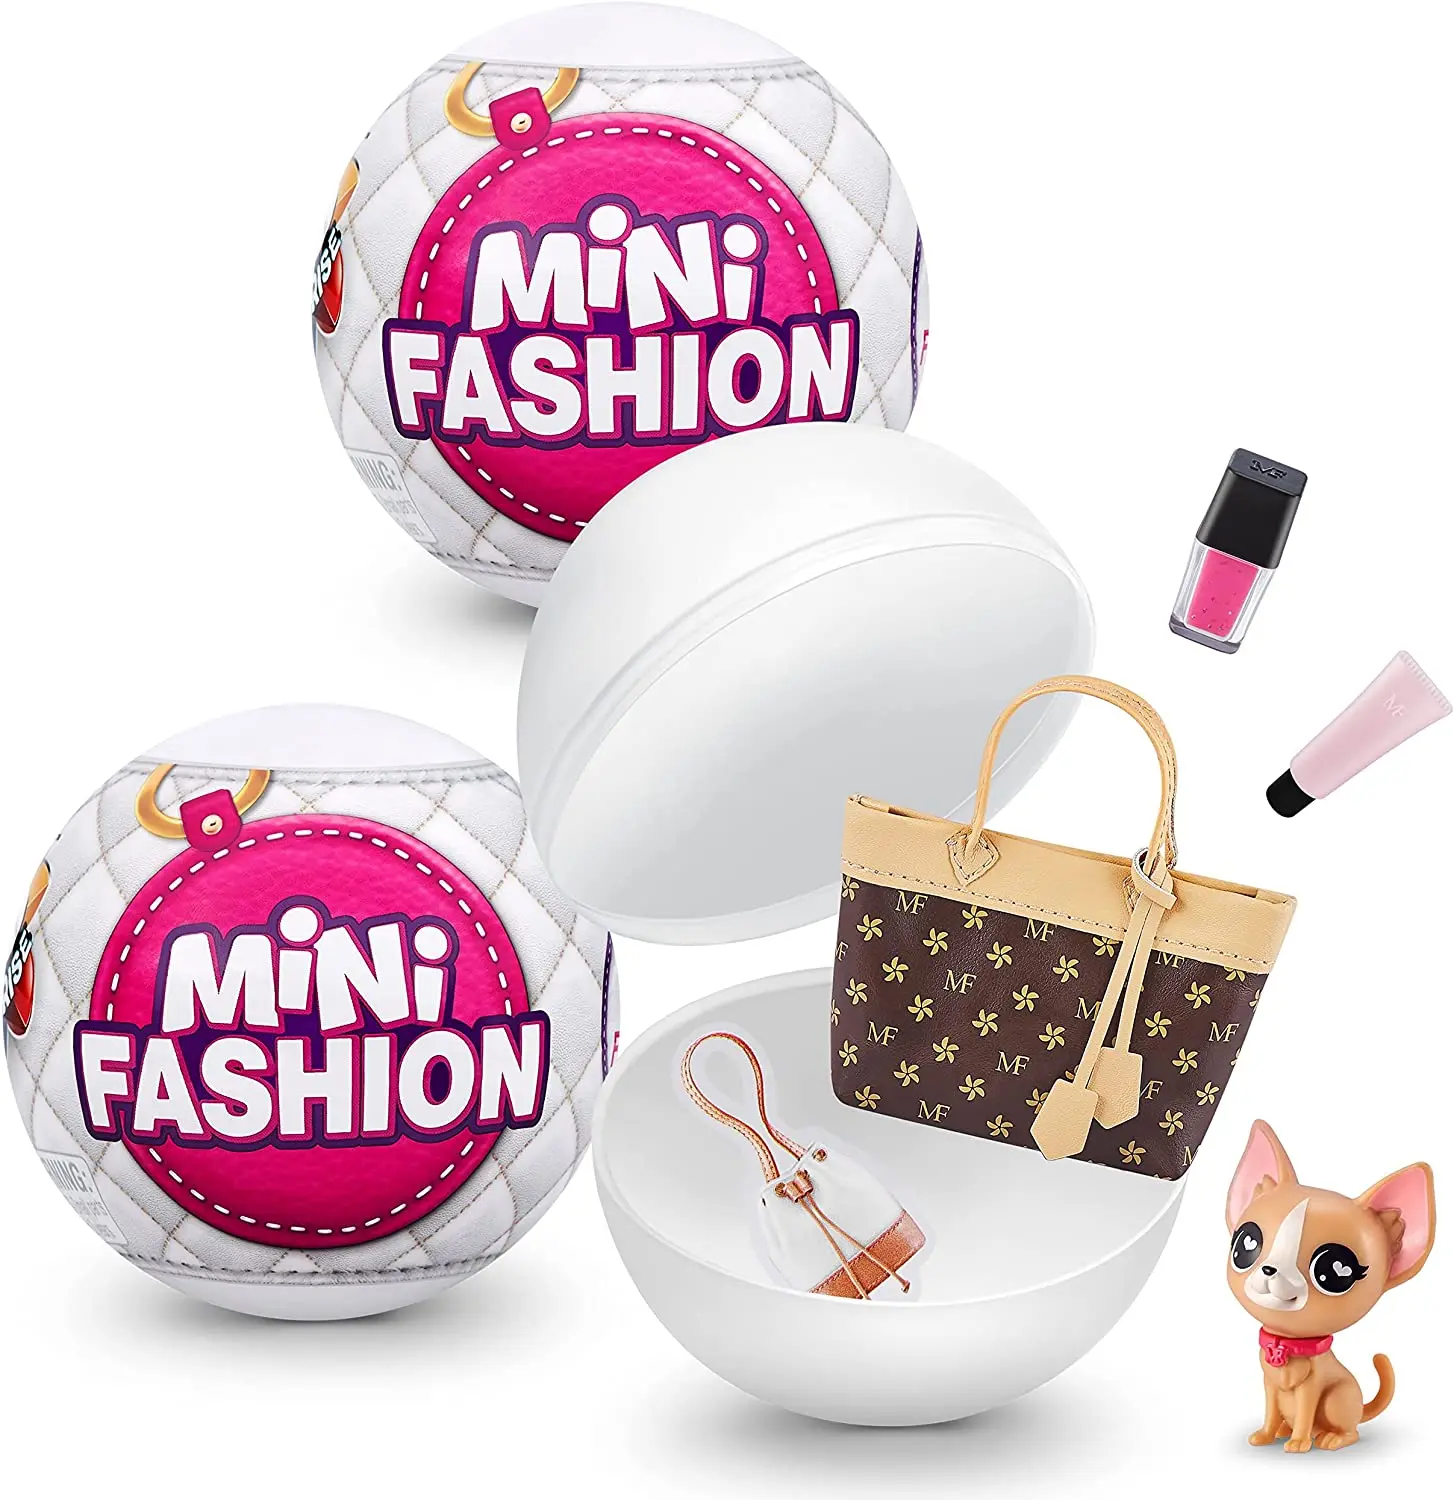 

Original Zuru 5 Surprise Mini Fashion Brands Toy Real Fabric Fashion Bags and Accessories Capsule Collectible Toy Children Gifts